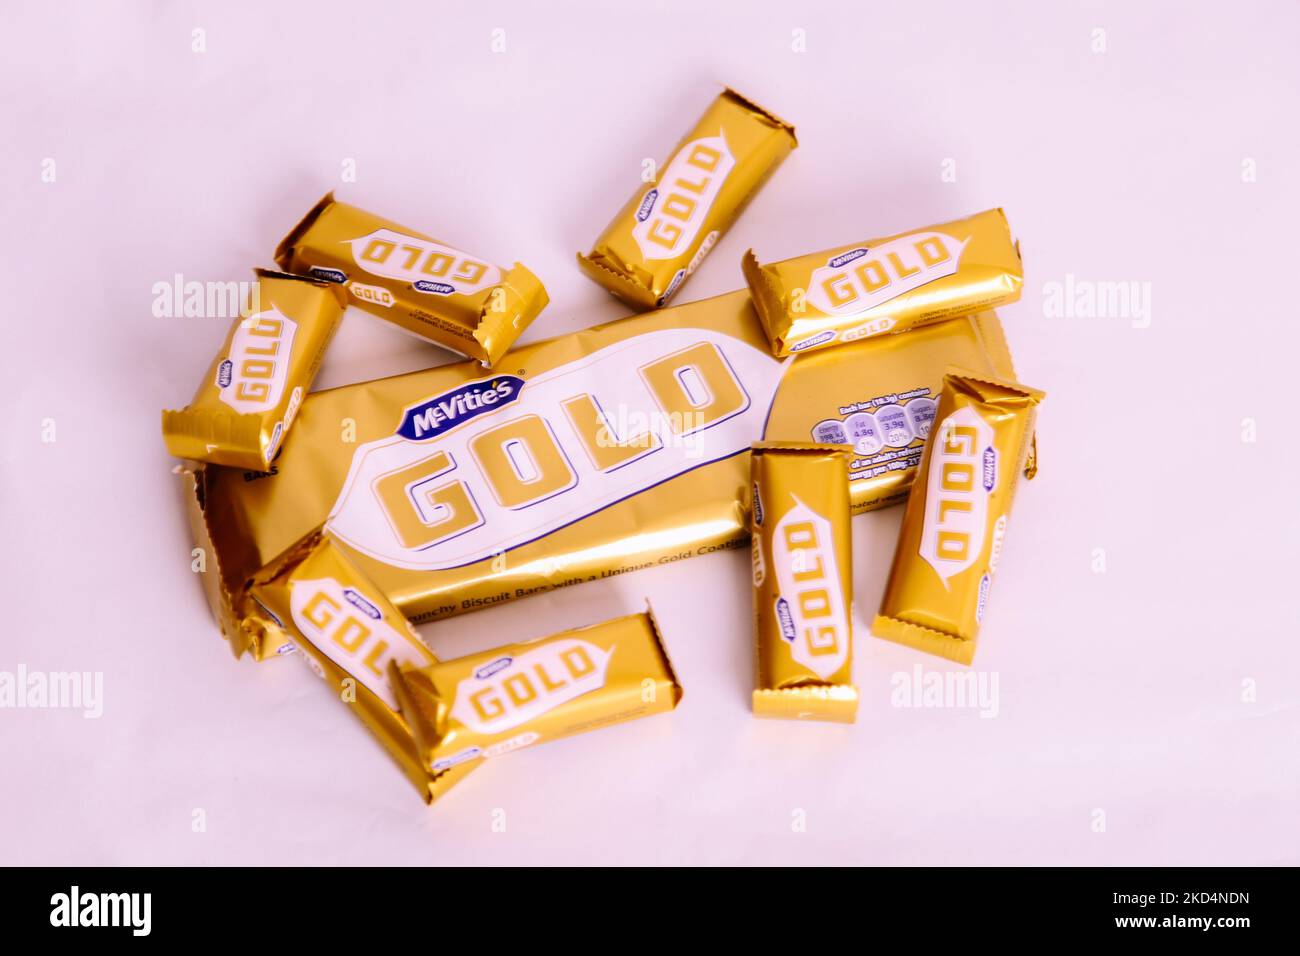 McVities Gold Bar Multipack surrounded by wrapped individual gold bars - golden chocolate bar snack treat Stock Photo